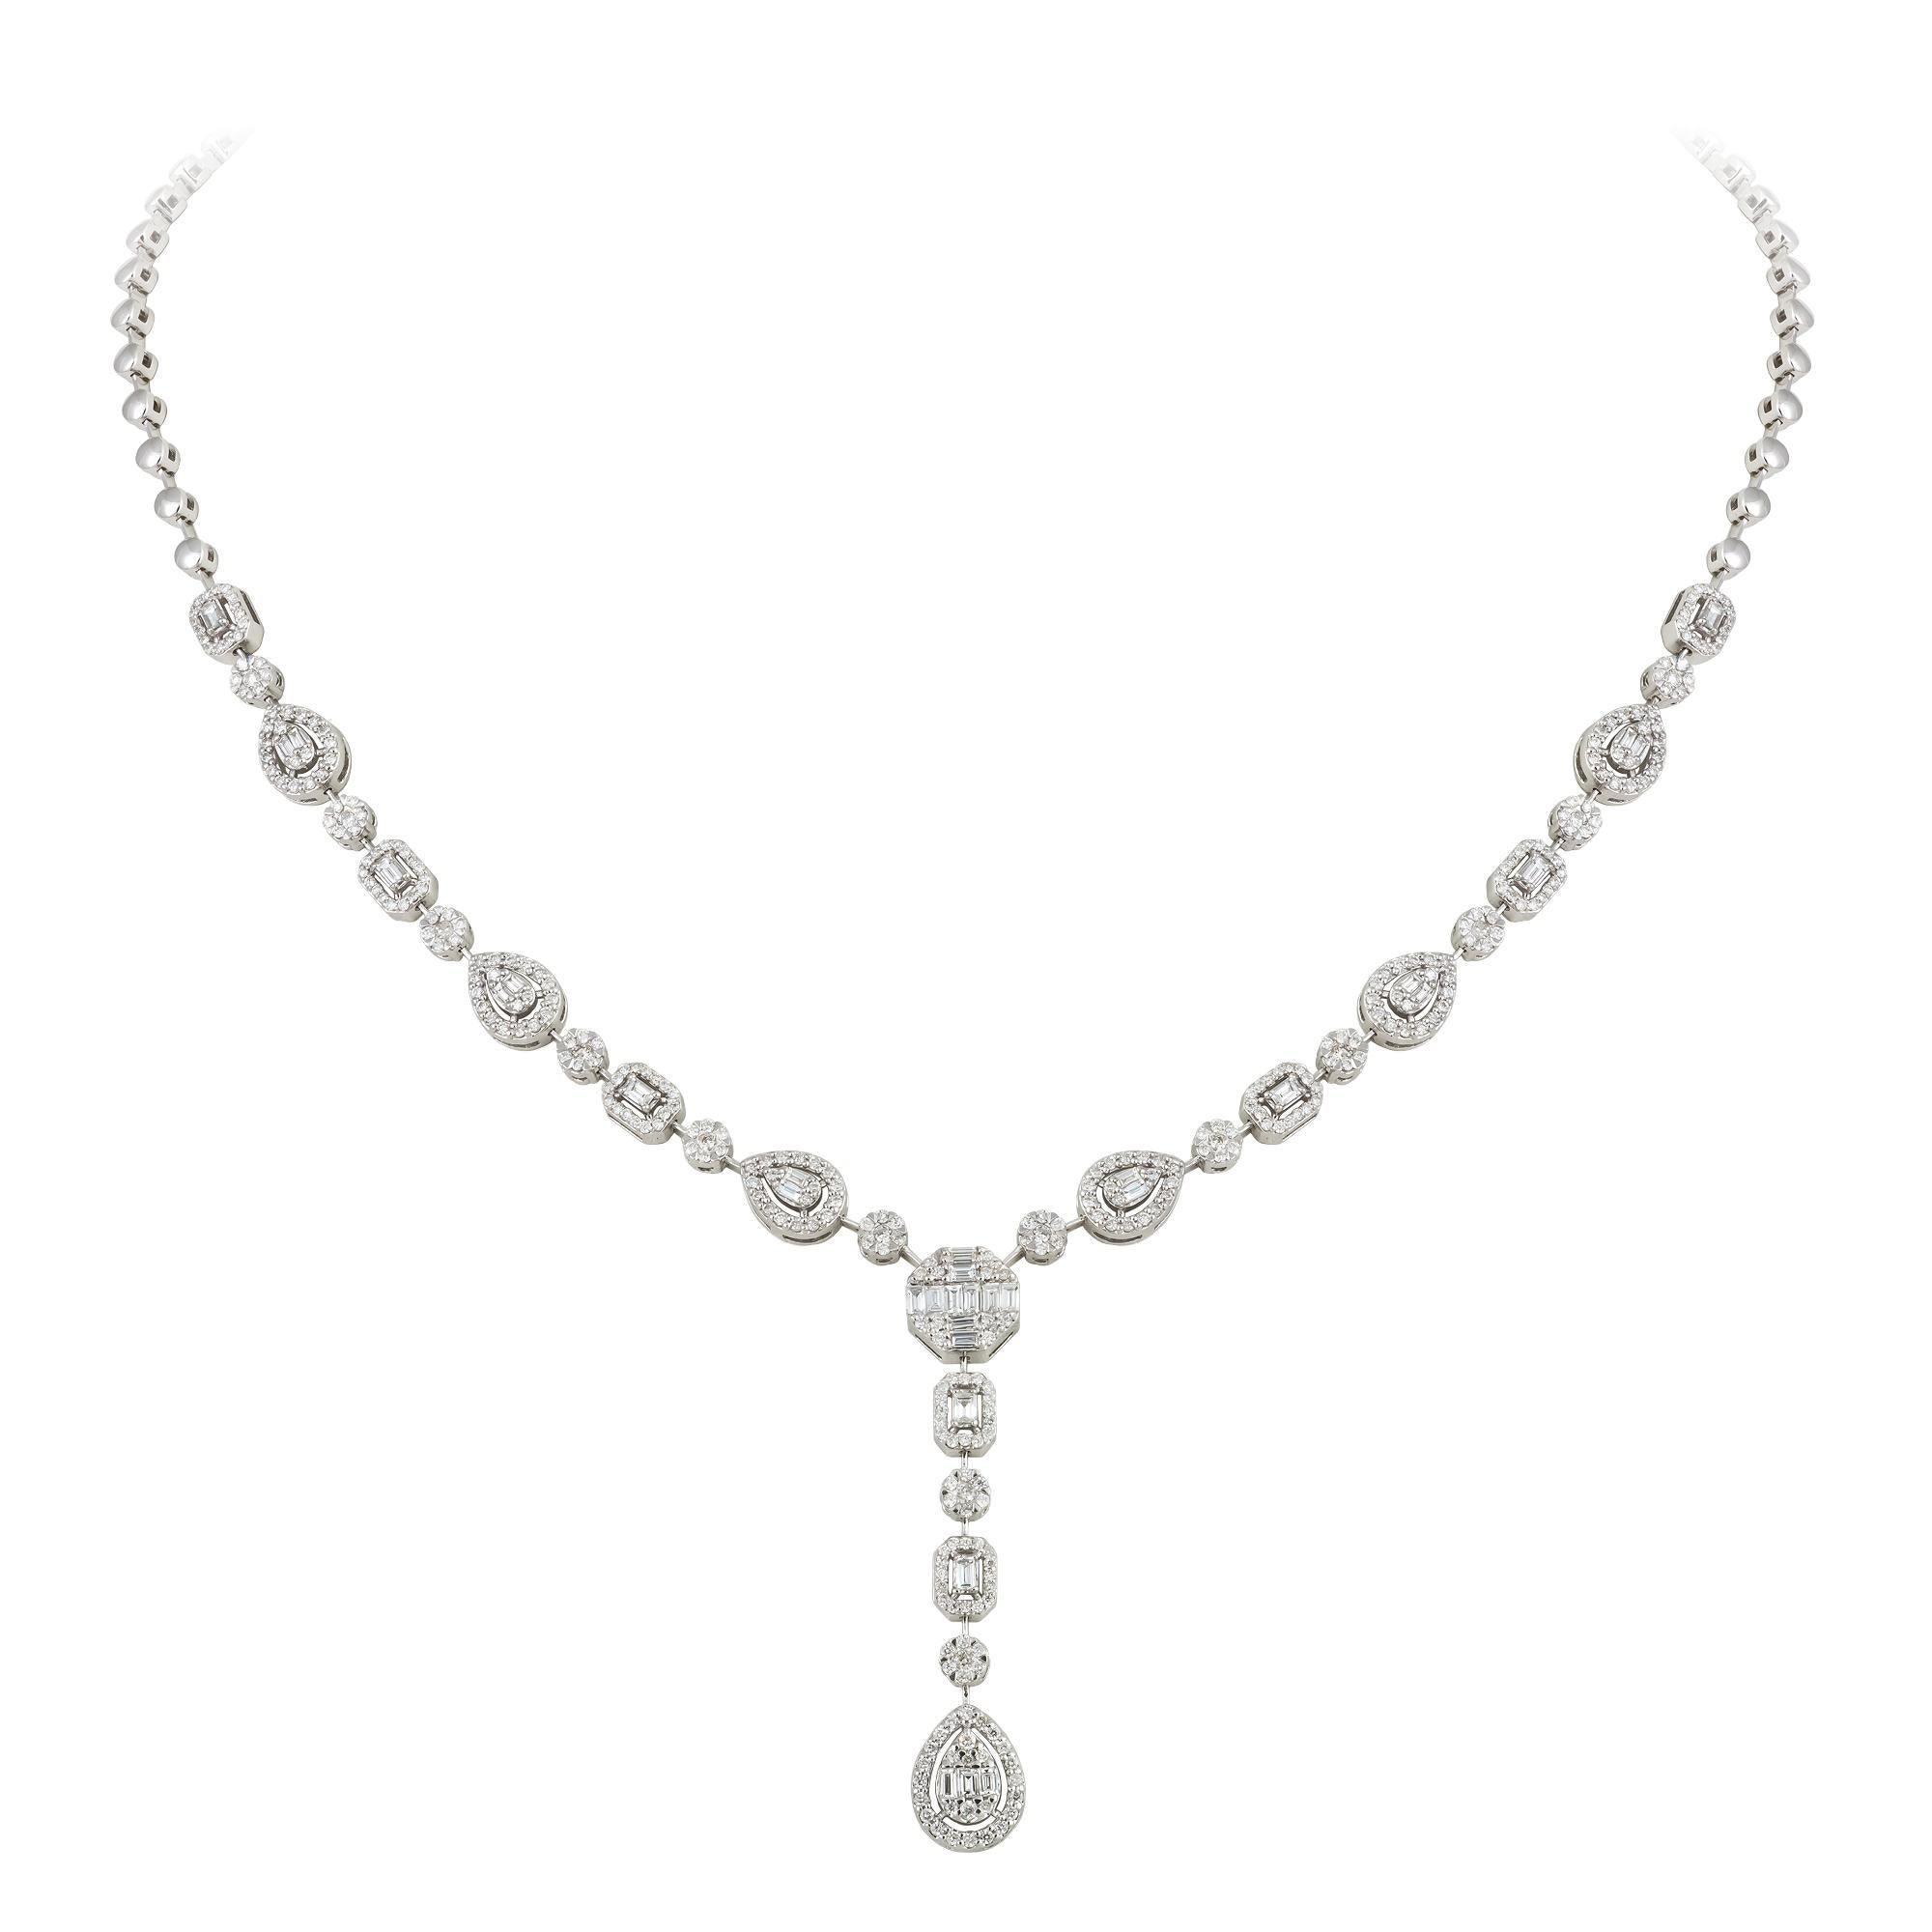 NECKLACE 18K White Gold Diamond 1.69 Cts/373 Pcs Tapered Baguette 0.86 Cts/33 Pcs
